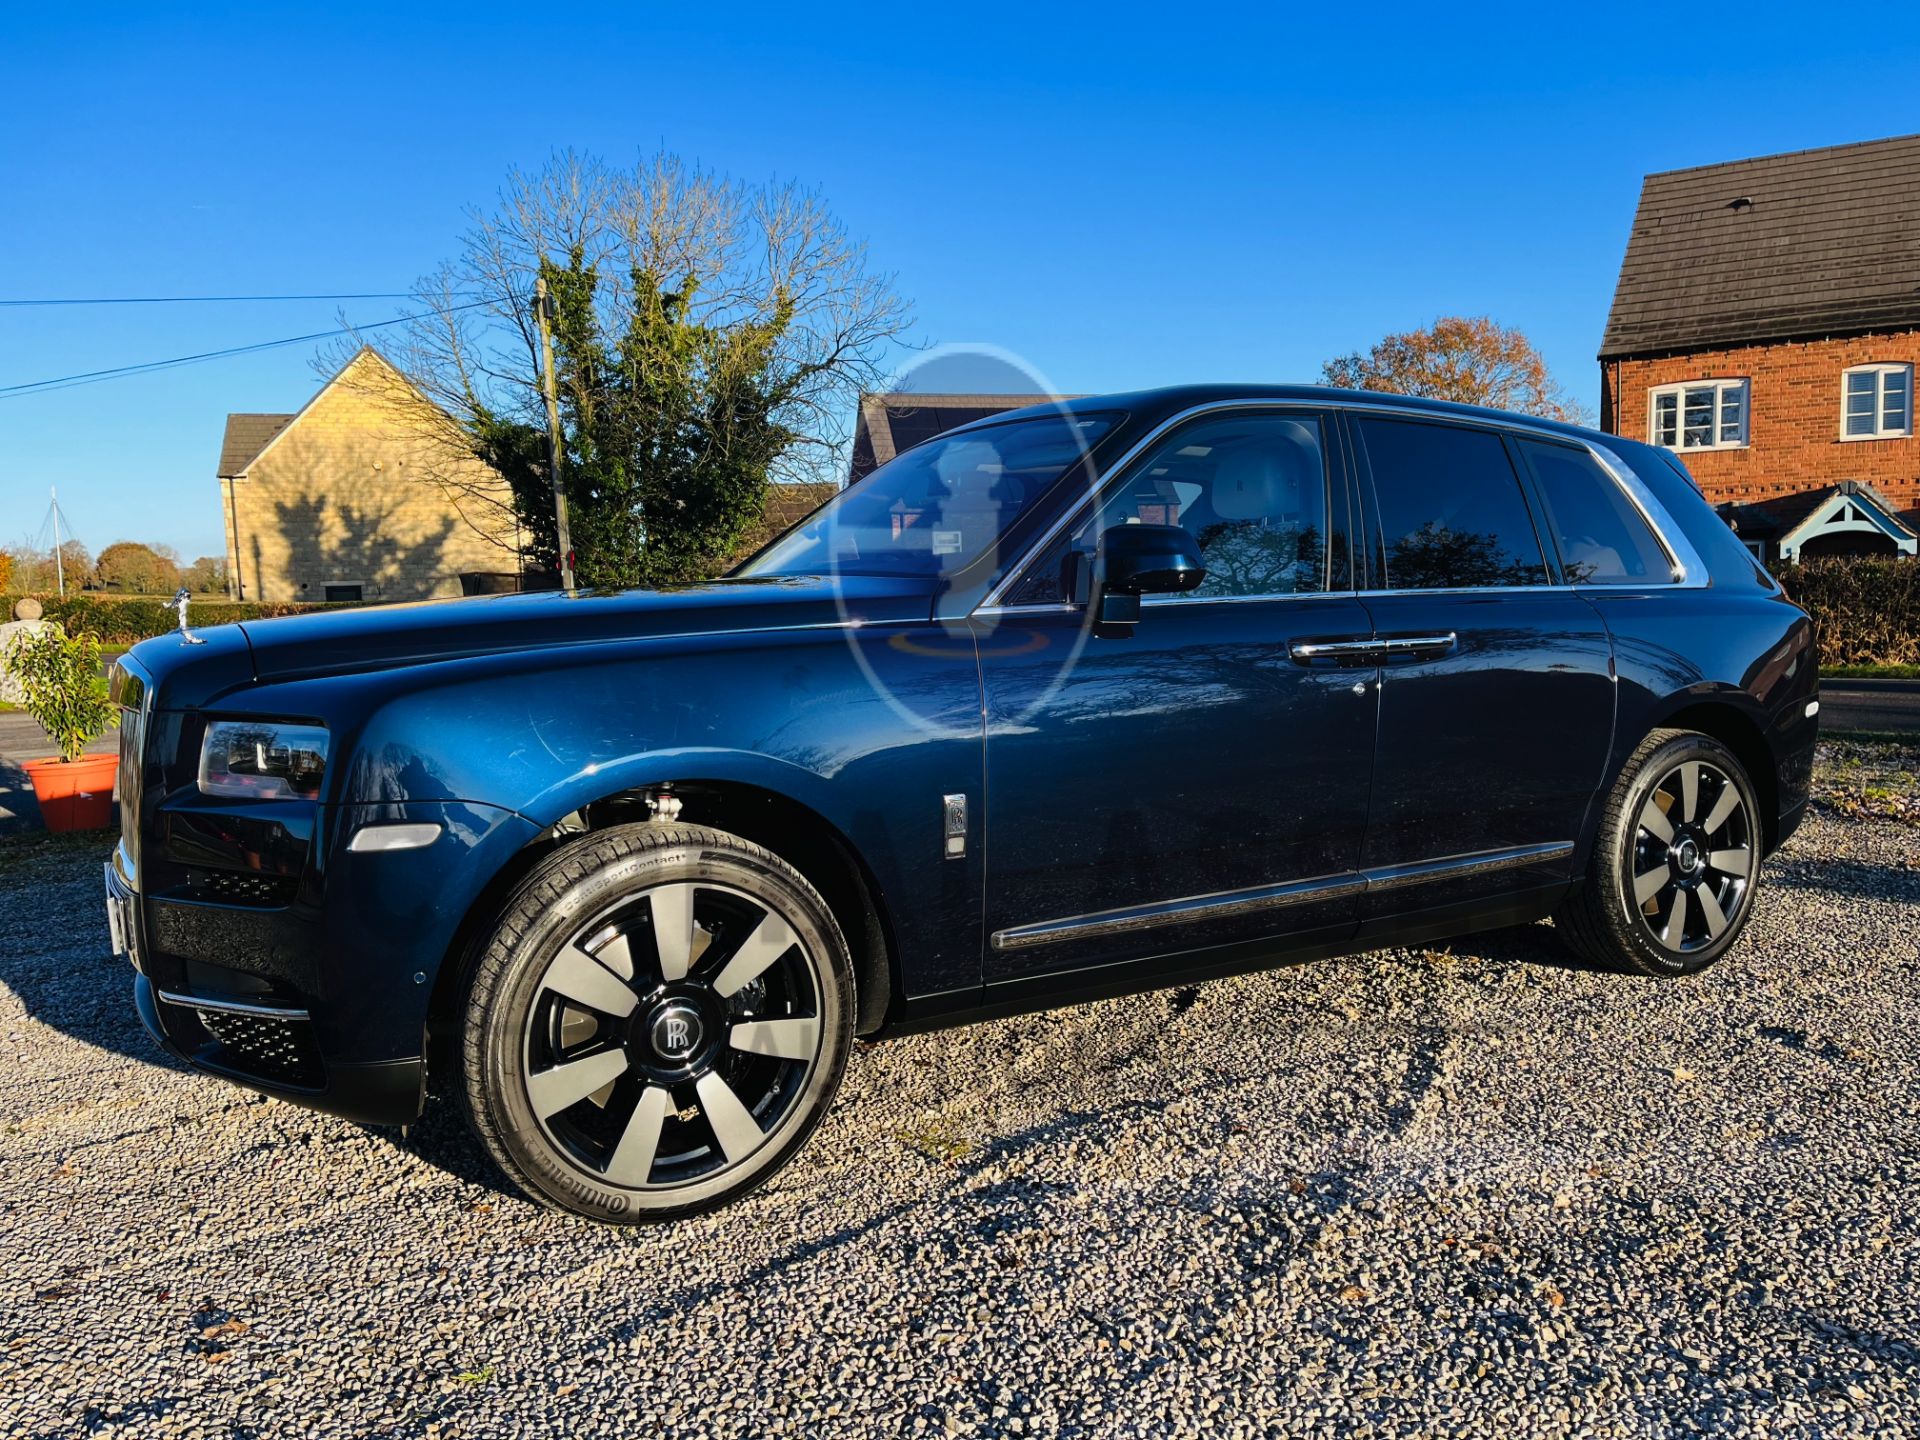 ROLLS ROYCE CULLINAN SILVER BADGE V12 6.75L (23 REG) ULTIMATE LUXURY SUV - ONLY 2100 MILES -MUST SEE